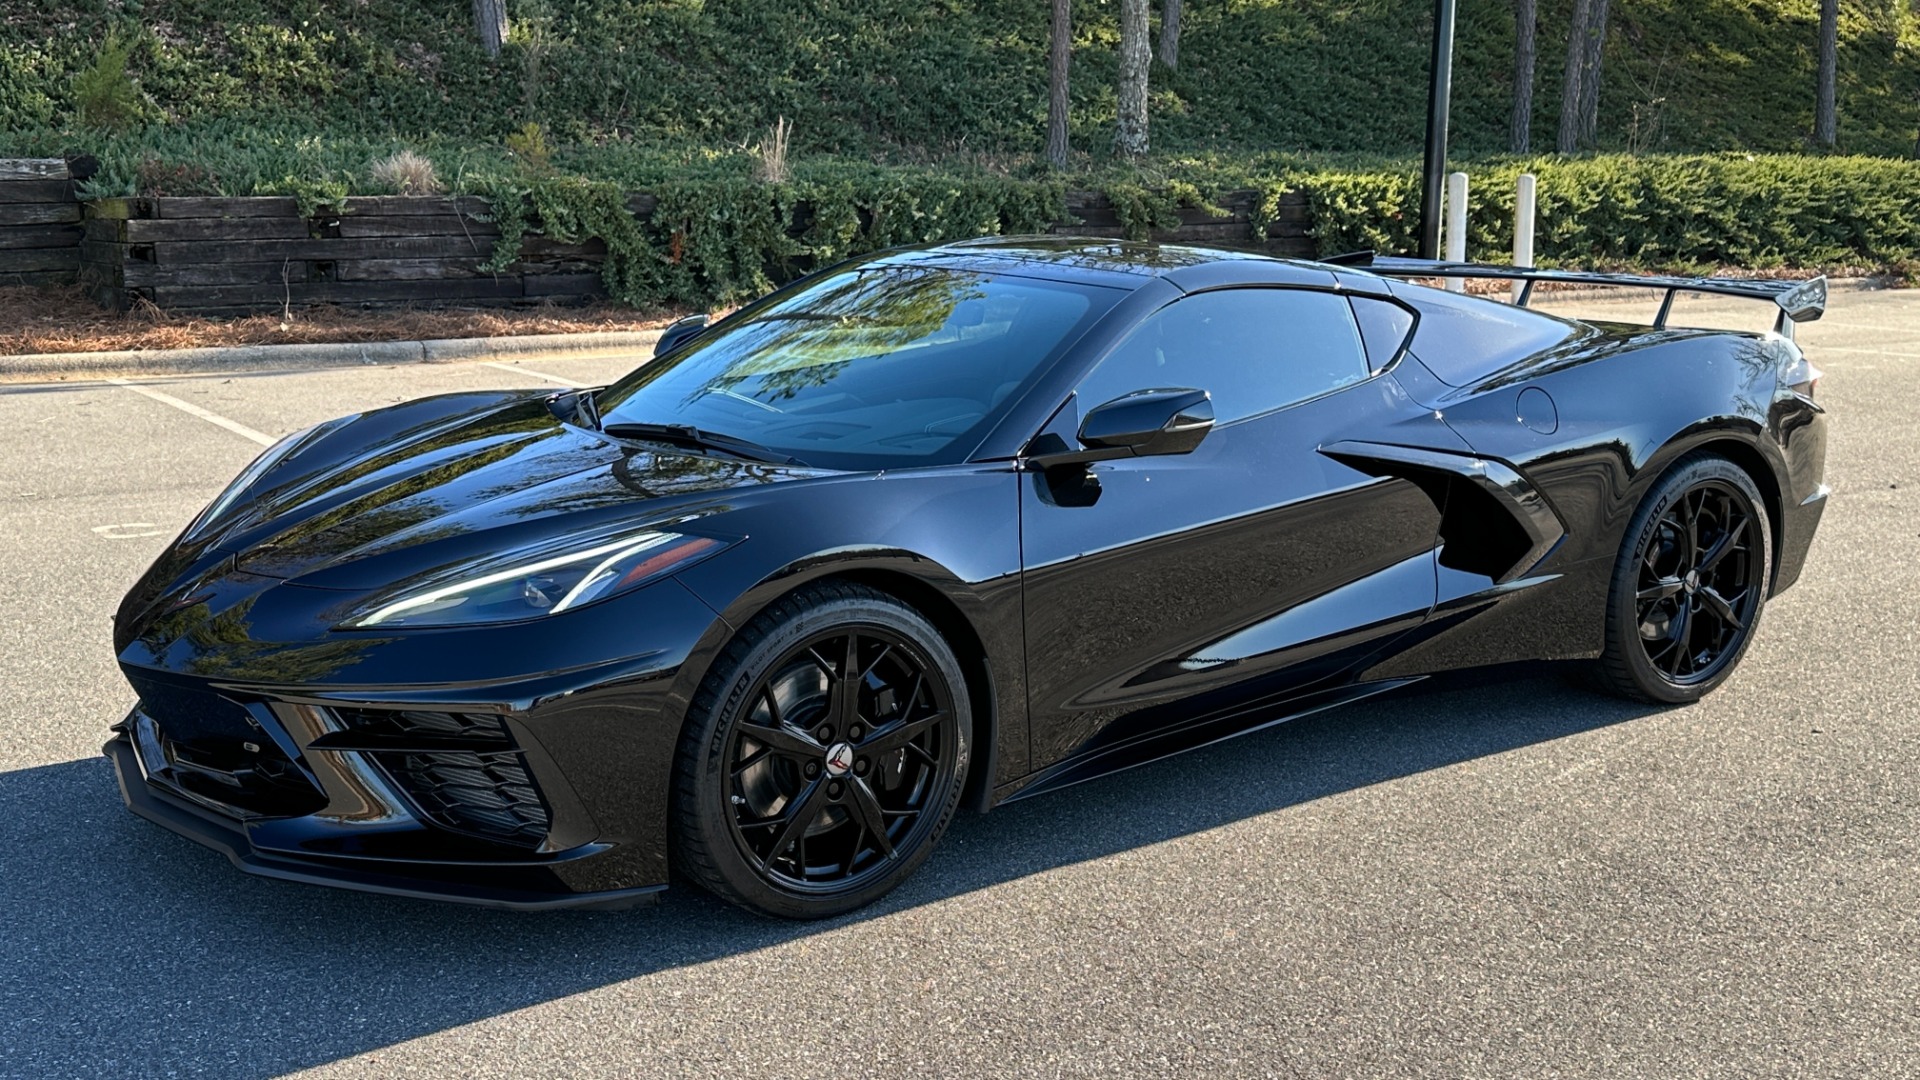 Used 2020 Chevrolet Corvette 3LT / Z51 PERFORMANCE PACKAGE / HIGH WING SPOILER / MAGRIDE / CARBON FIBER for sale Sold at Formula Imports in Charlotte NC 28227 3